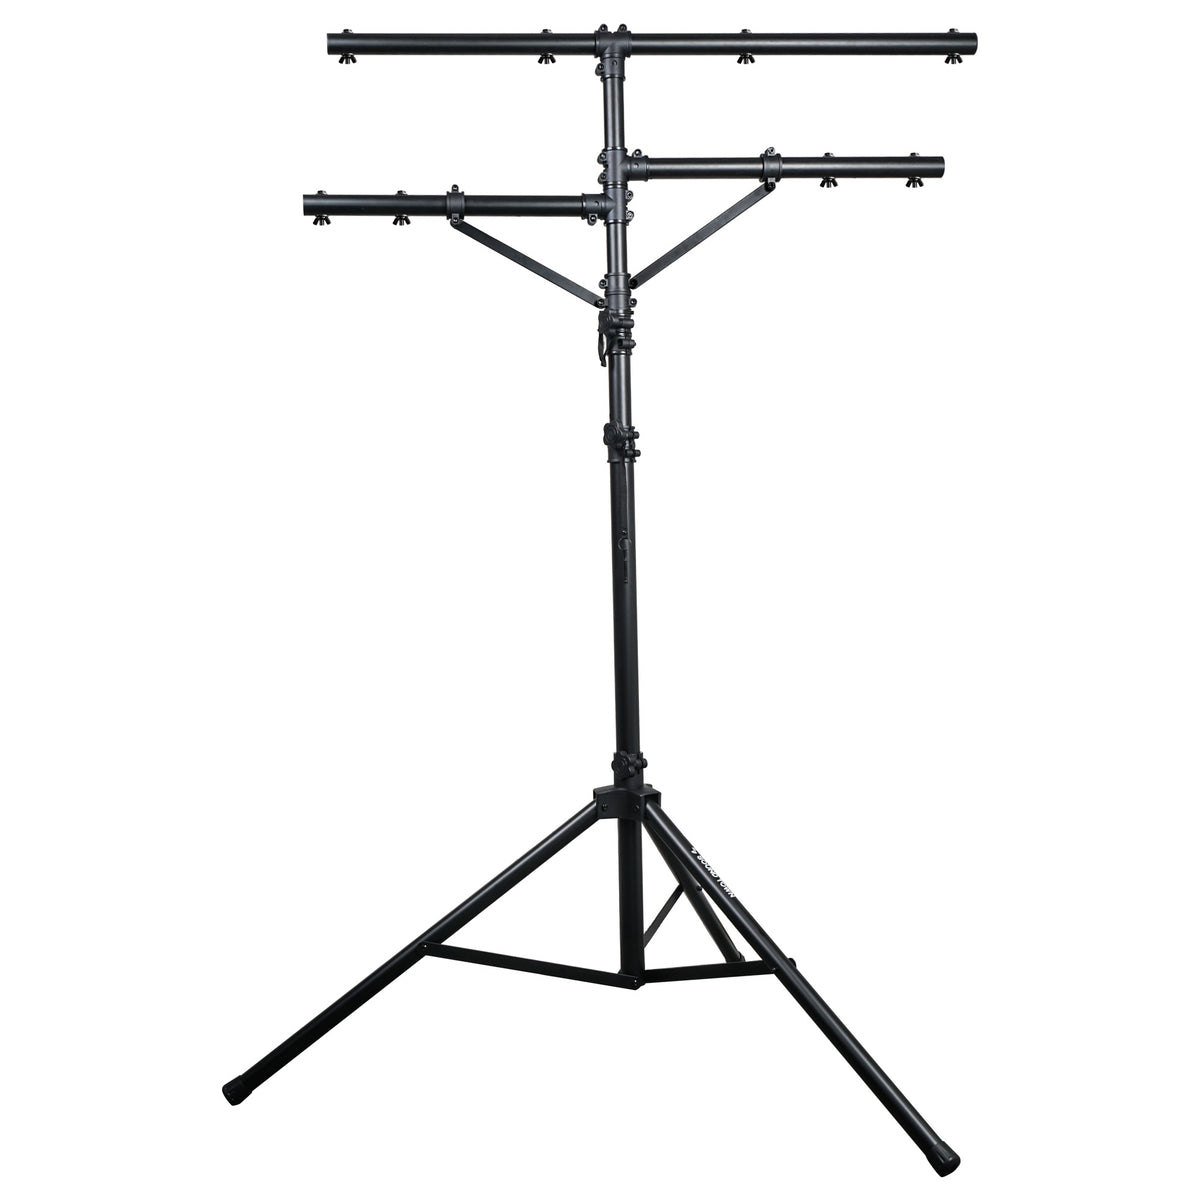 STLS-011 Lighting Stand with Side Bars, Tripod Base, 3 